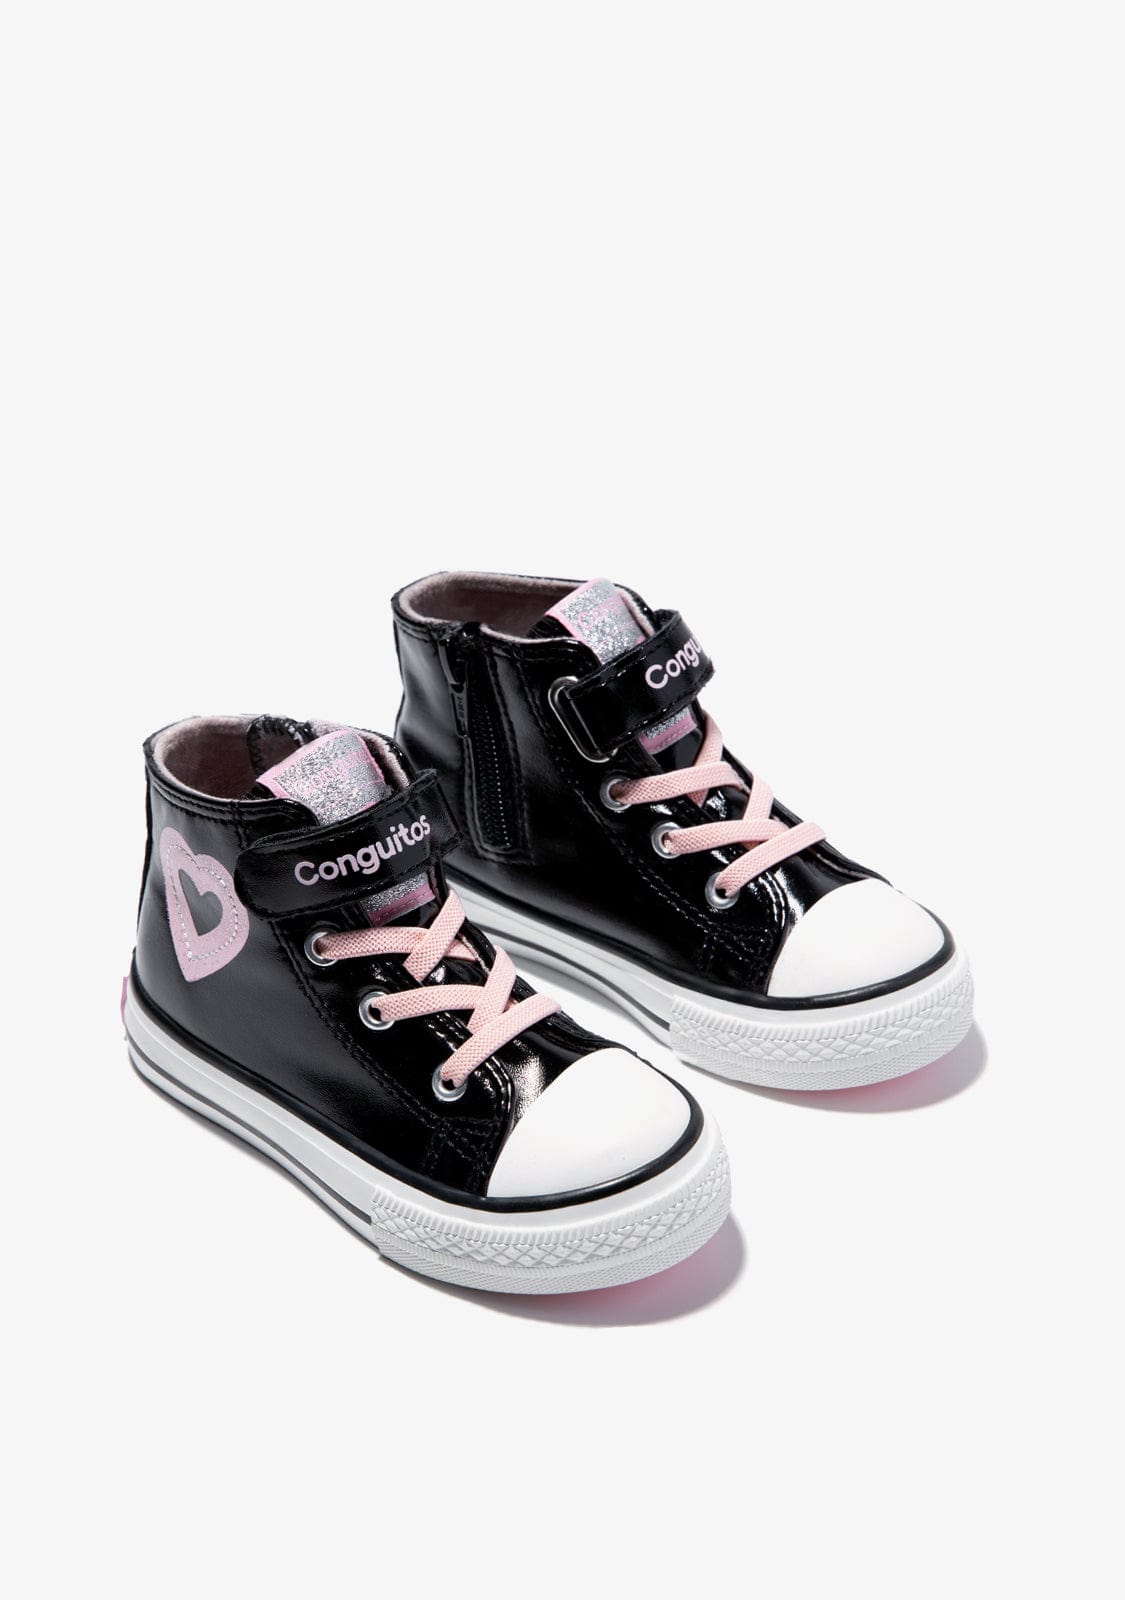 CONGUITOS Shoes Girl's Black Patent Leather Heart Hi-Top Sneakers